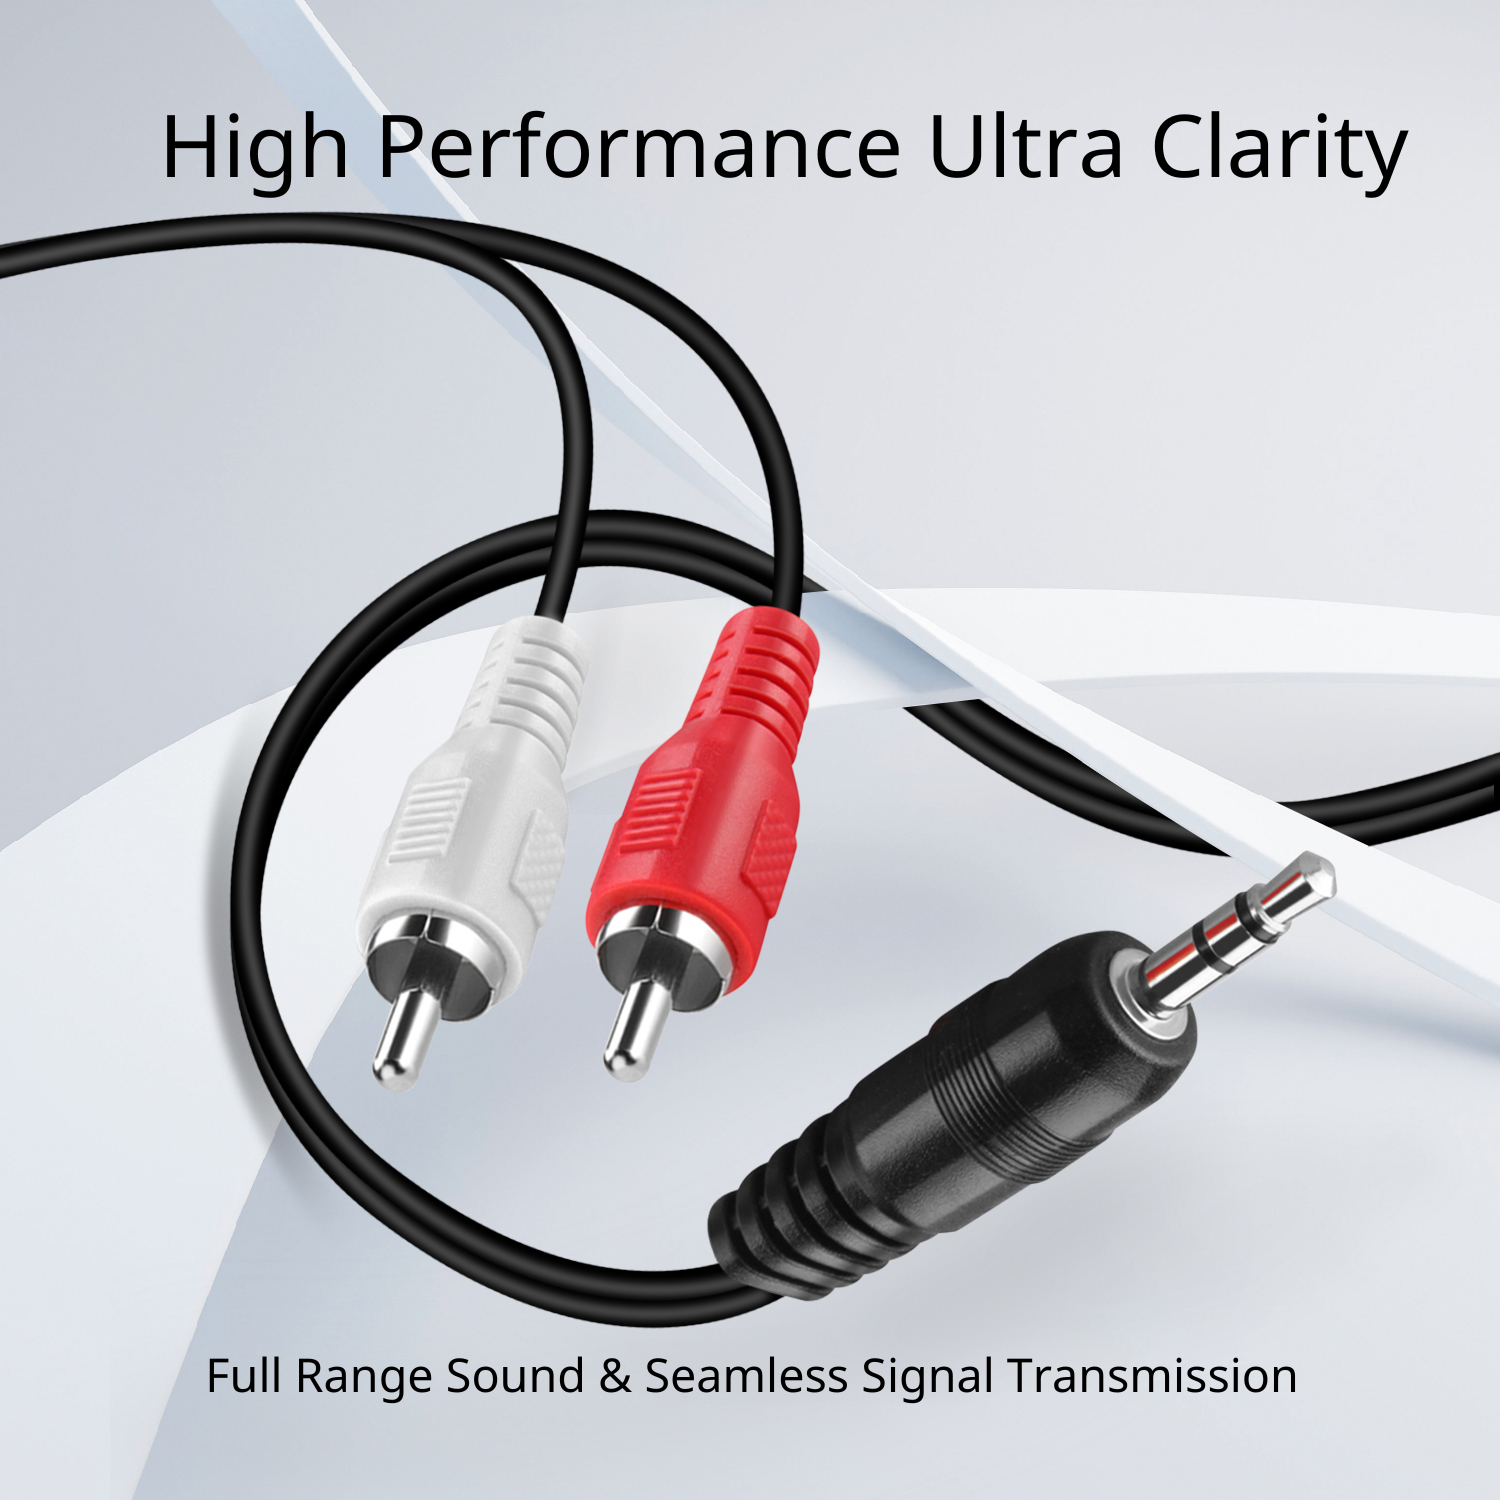 Delivers high performance and versatile full range bass for your AV audio device equipment; Accurately transfer high bandwidth frequency quality detailed clean natural pure audio sound / realism and clarity jitter-free in audio signals